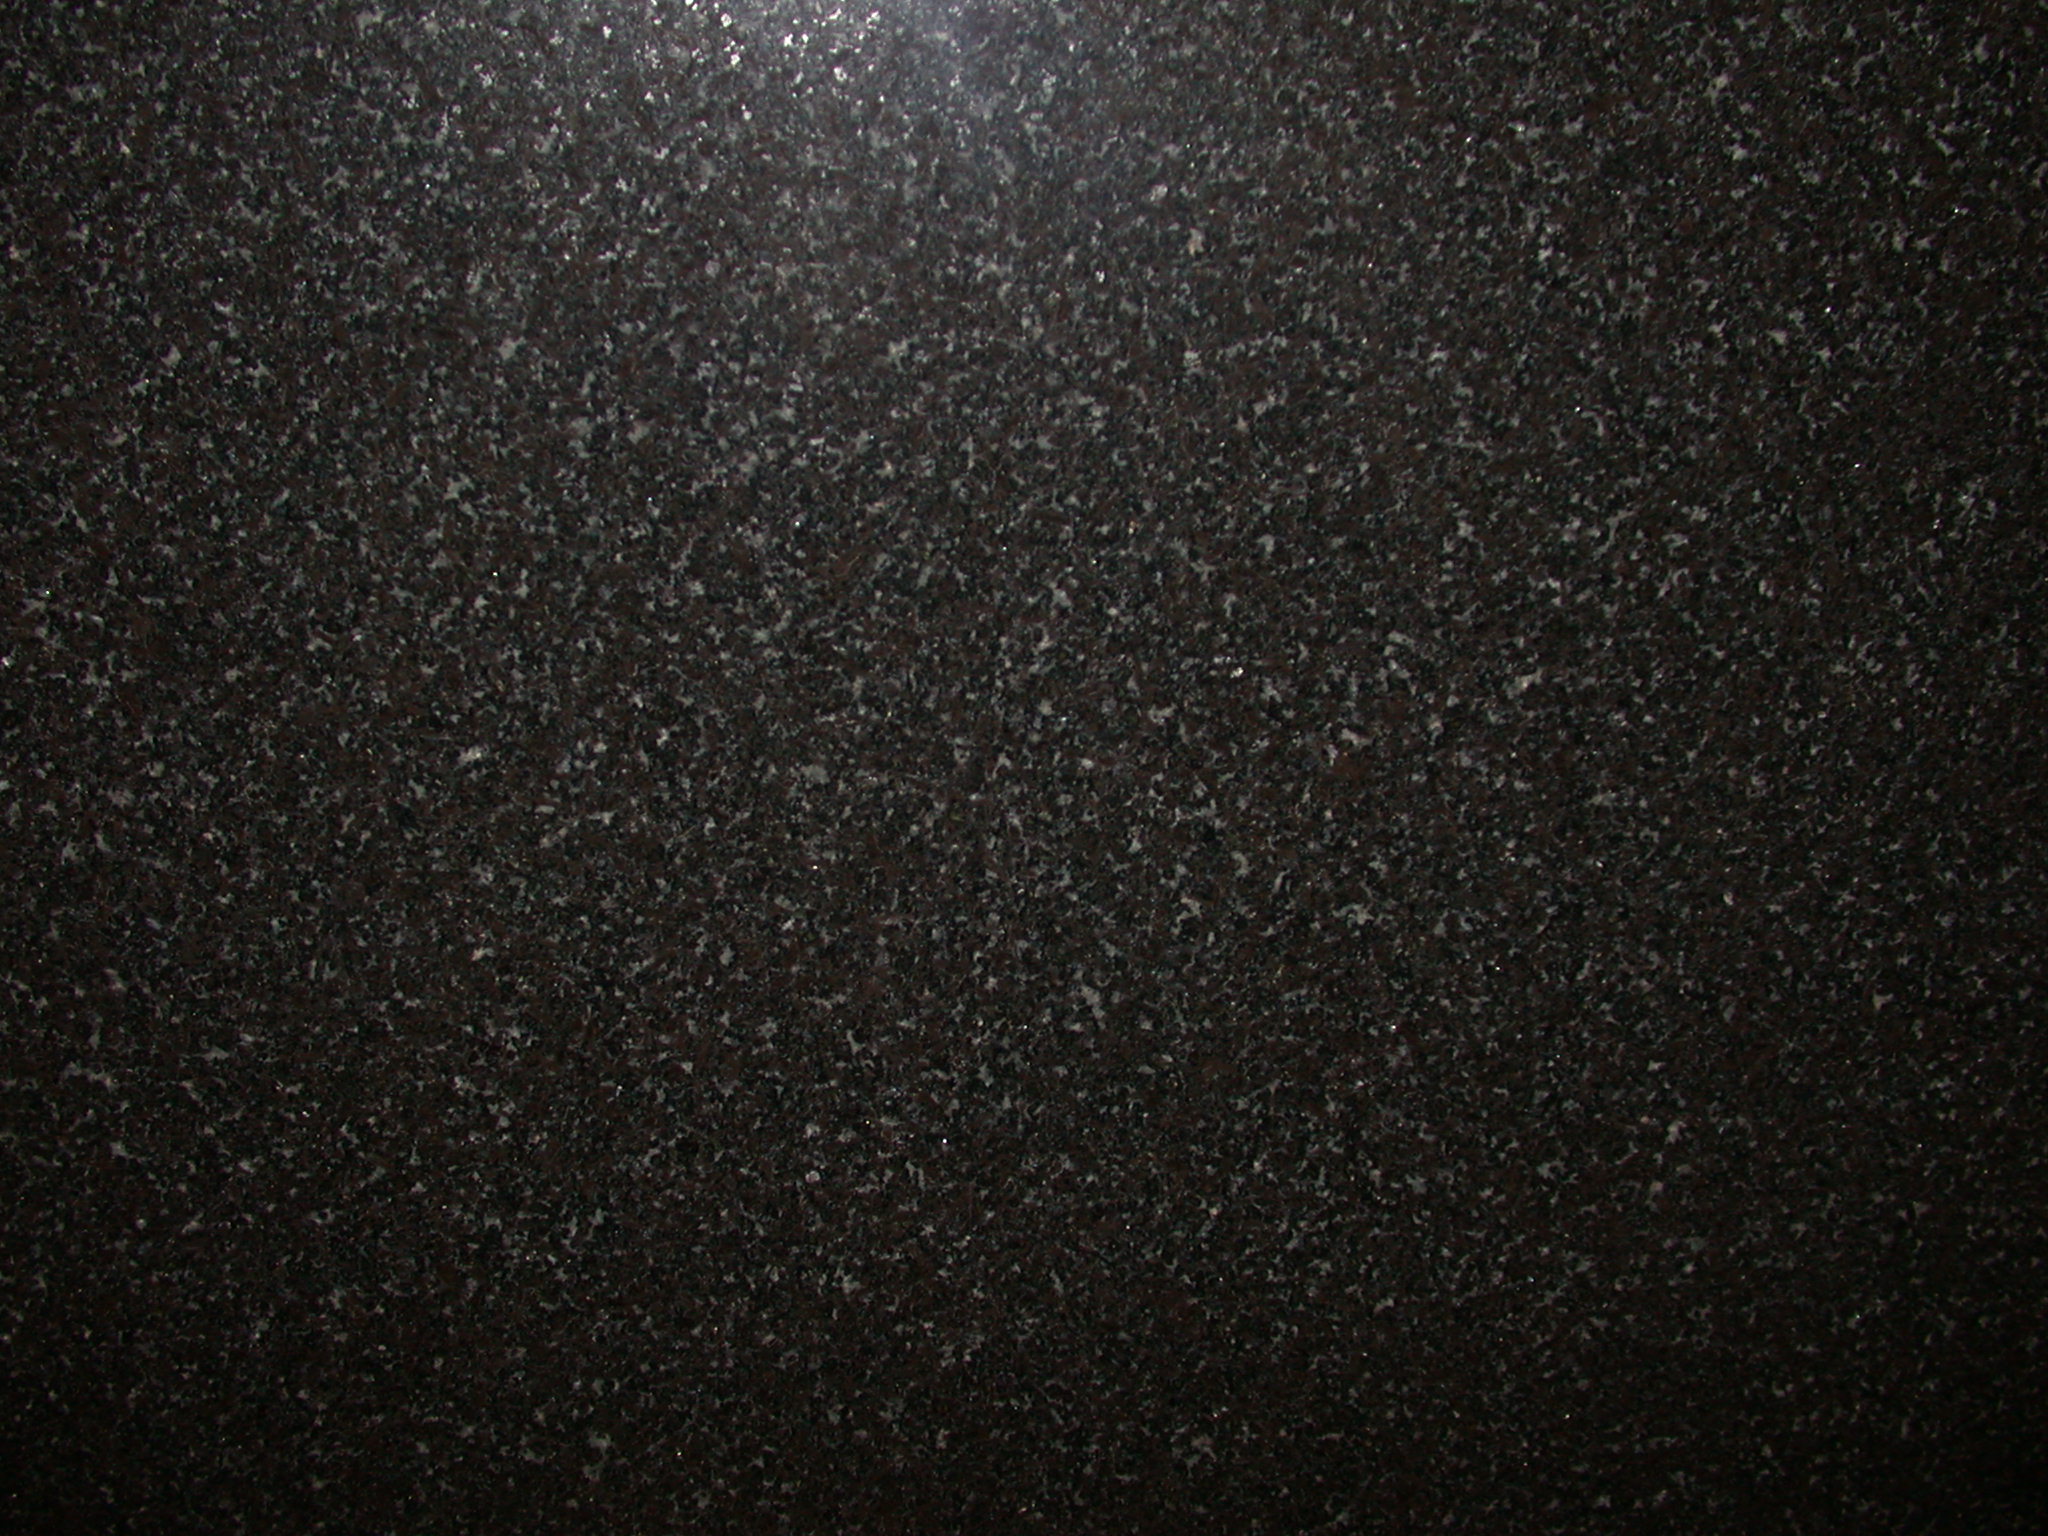 Black Granite   Color Selection   All Granite and Marble Corp